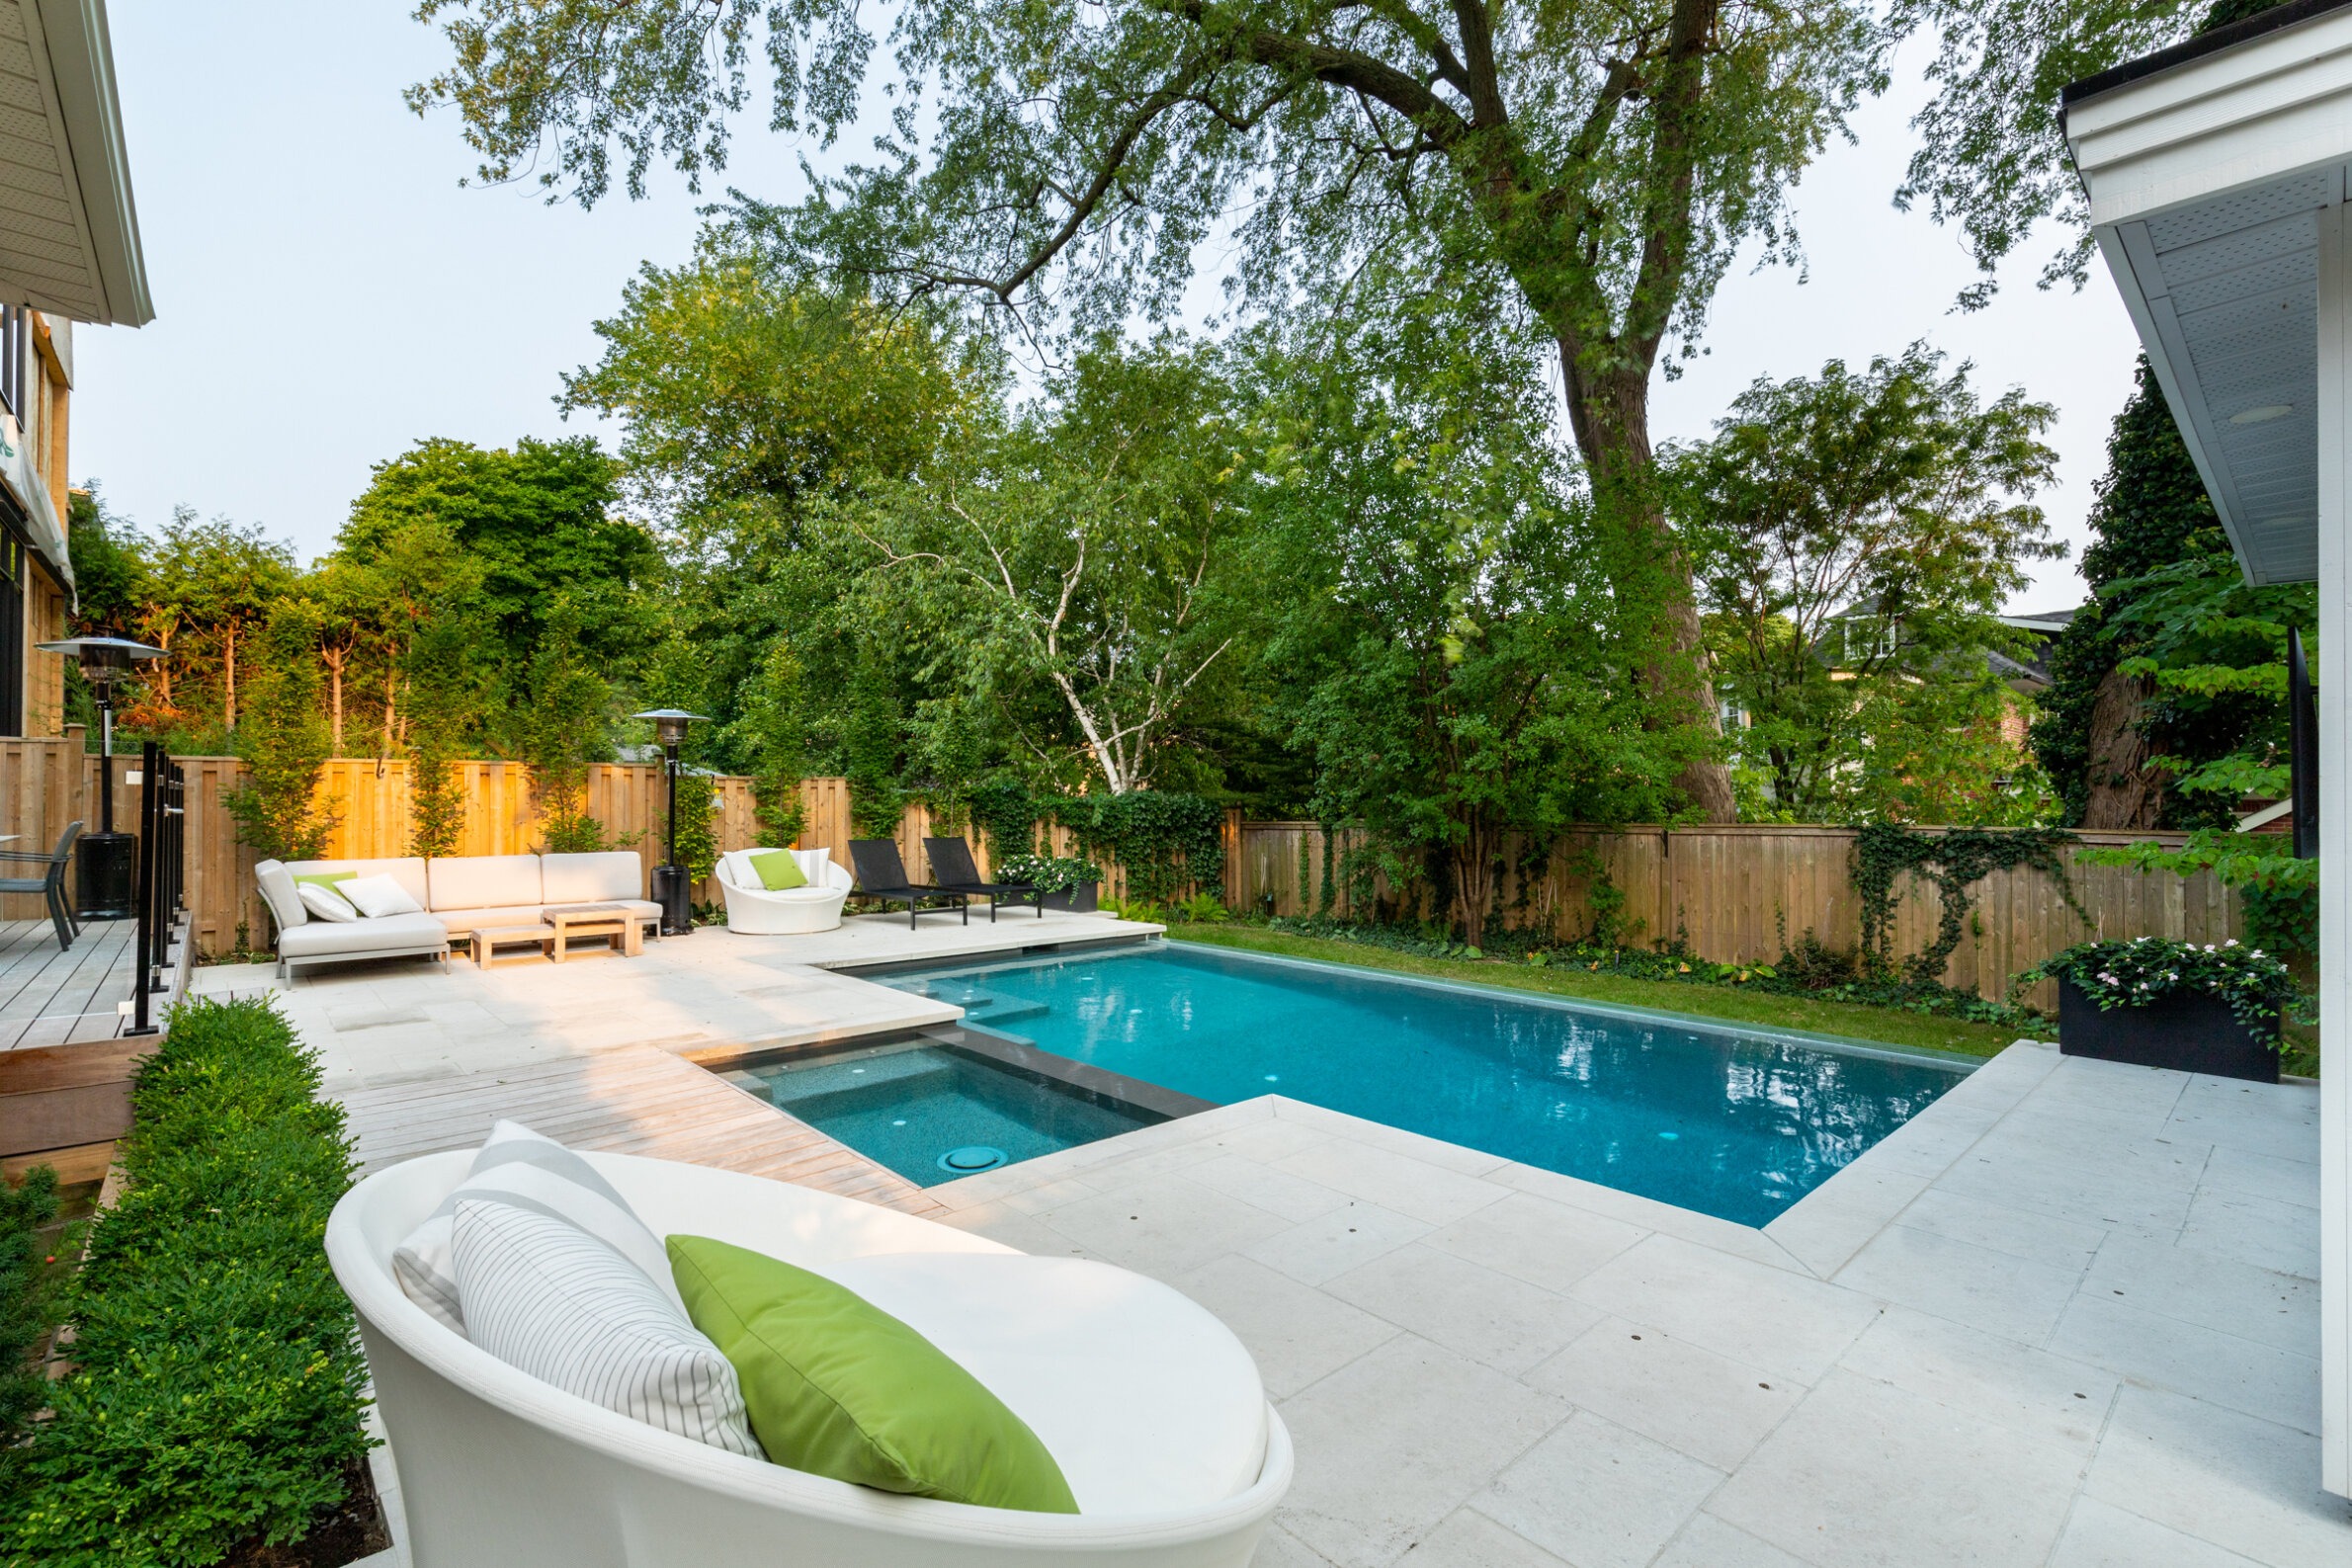 This image shows a serene backyard with a swimming pool, patio lounging area, manicured hedges, tall trees, and a wooden privacy fence.